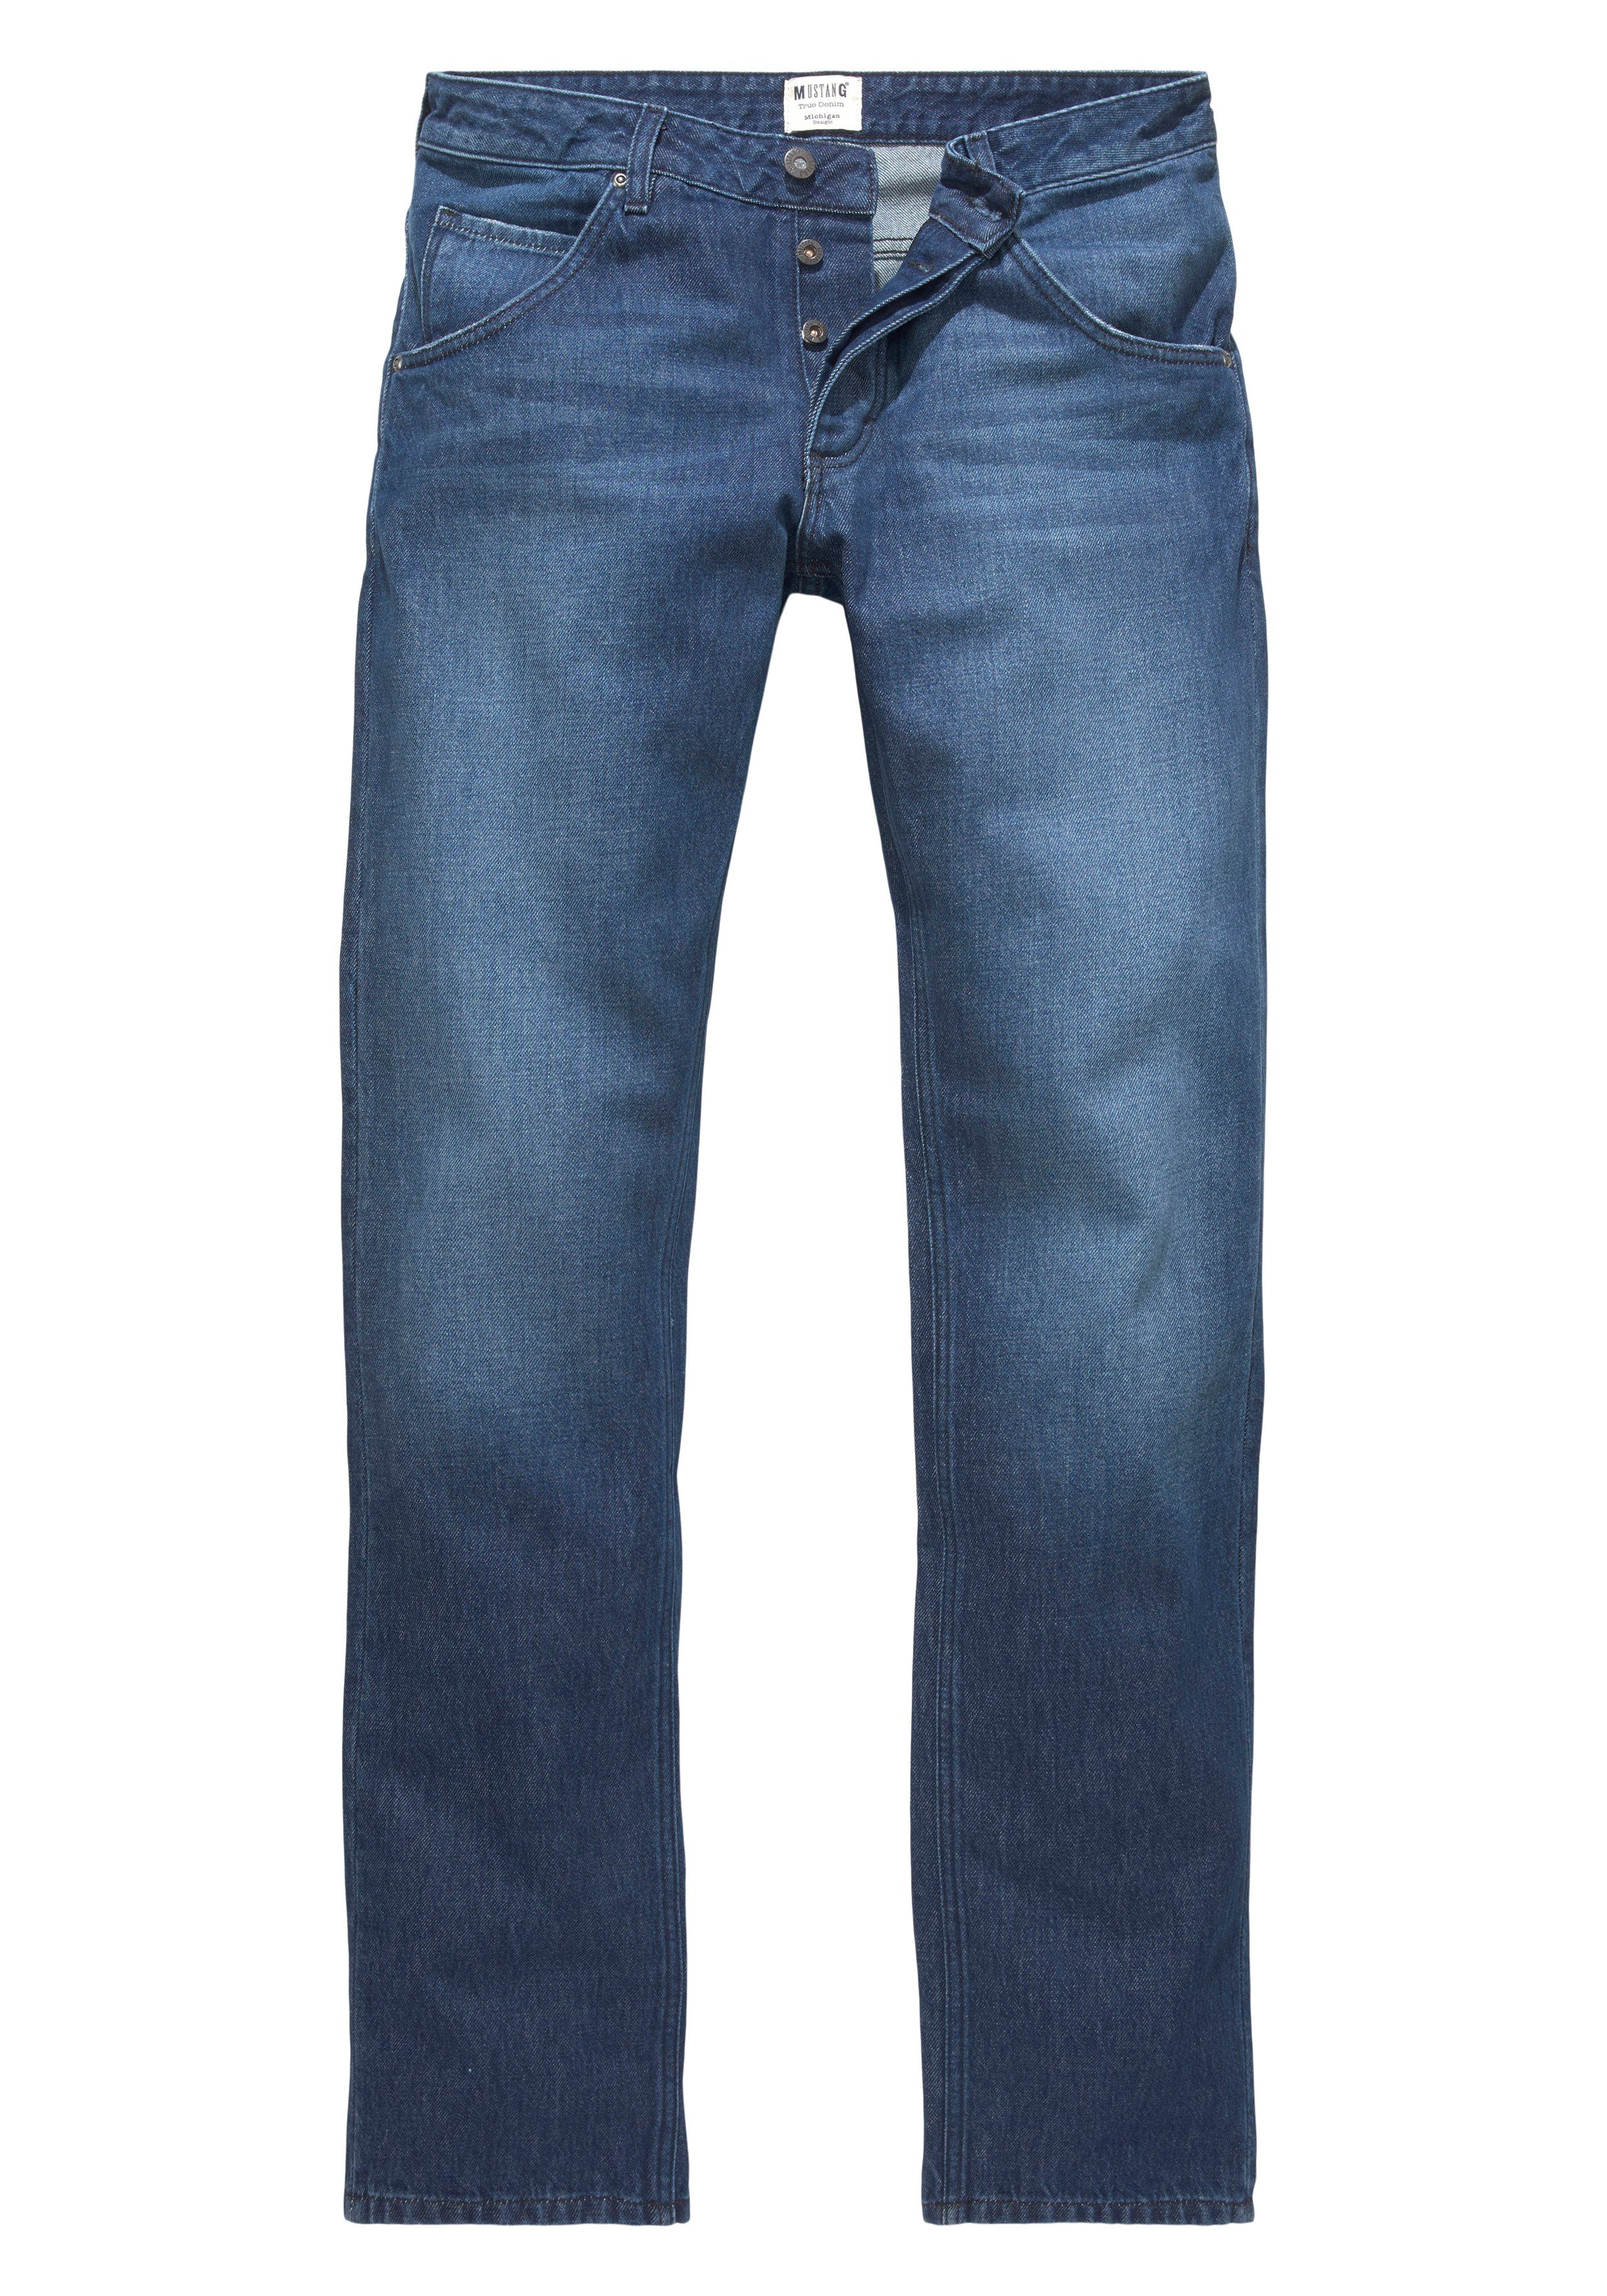 MUSTANG Straight-Jeans »MICHIGAN« in 5-Pocket-Form | OTTO